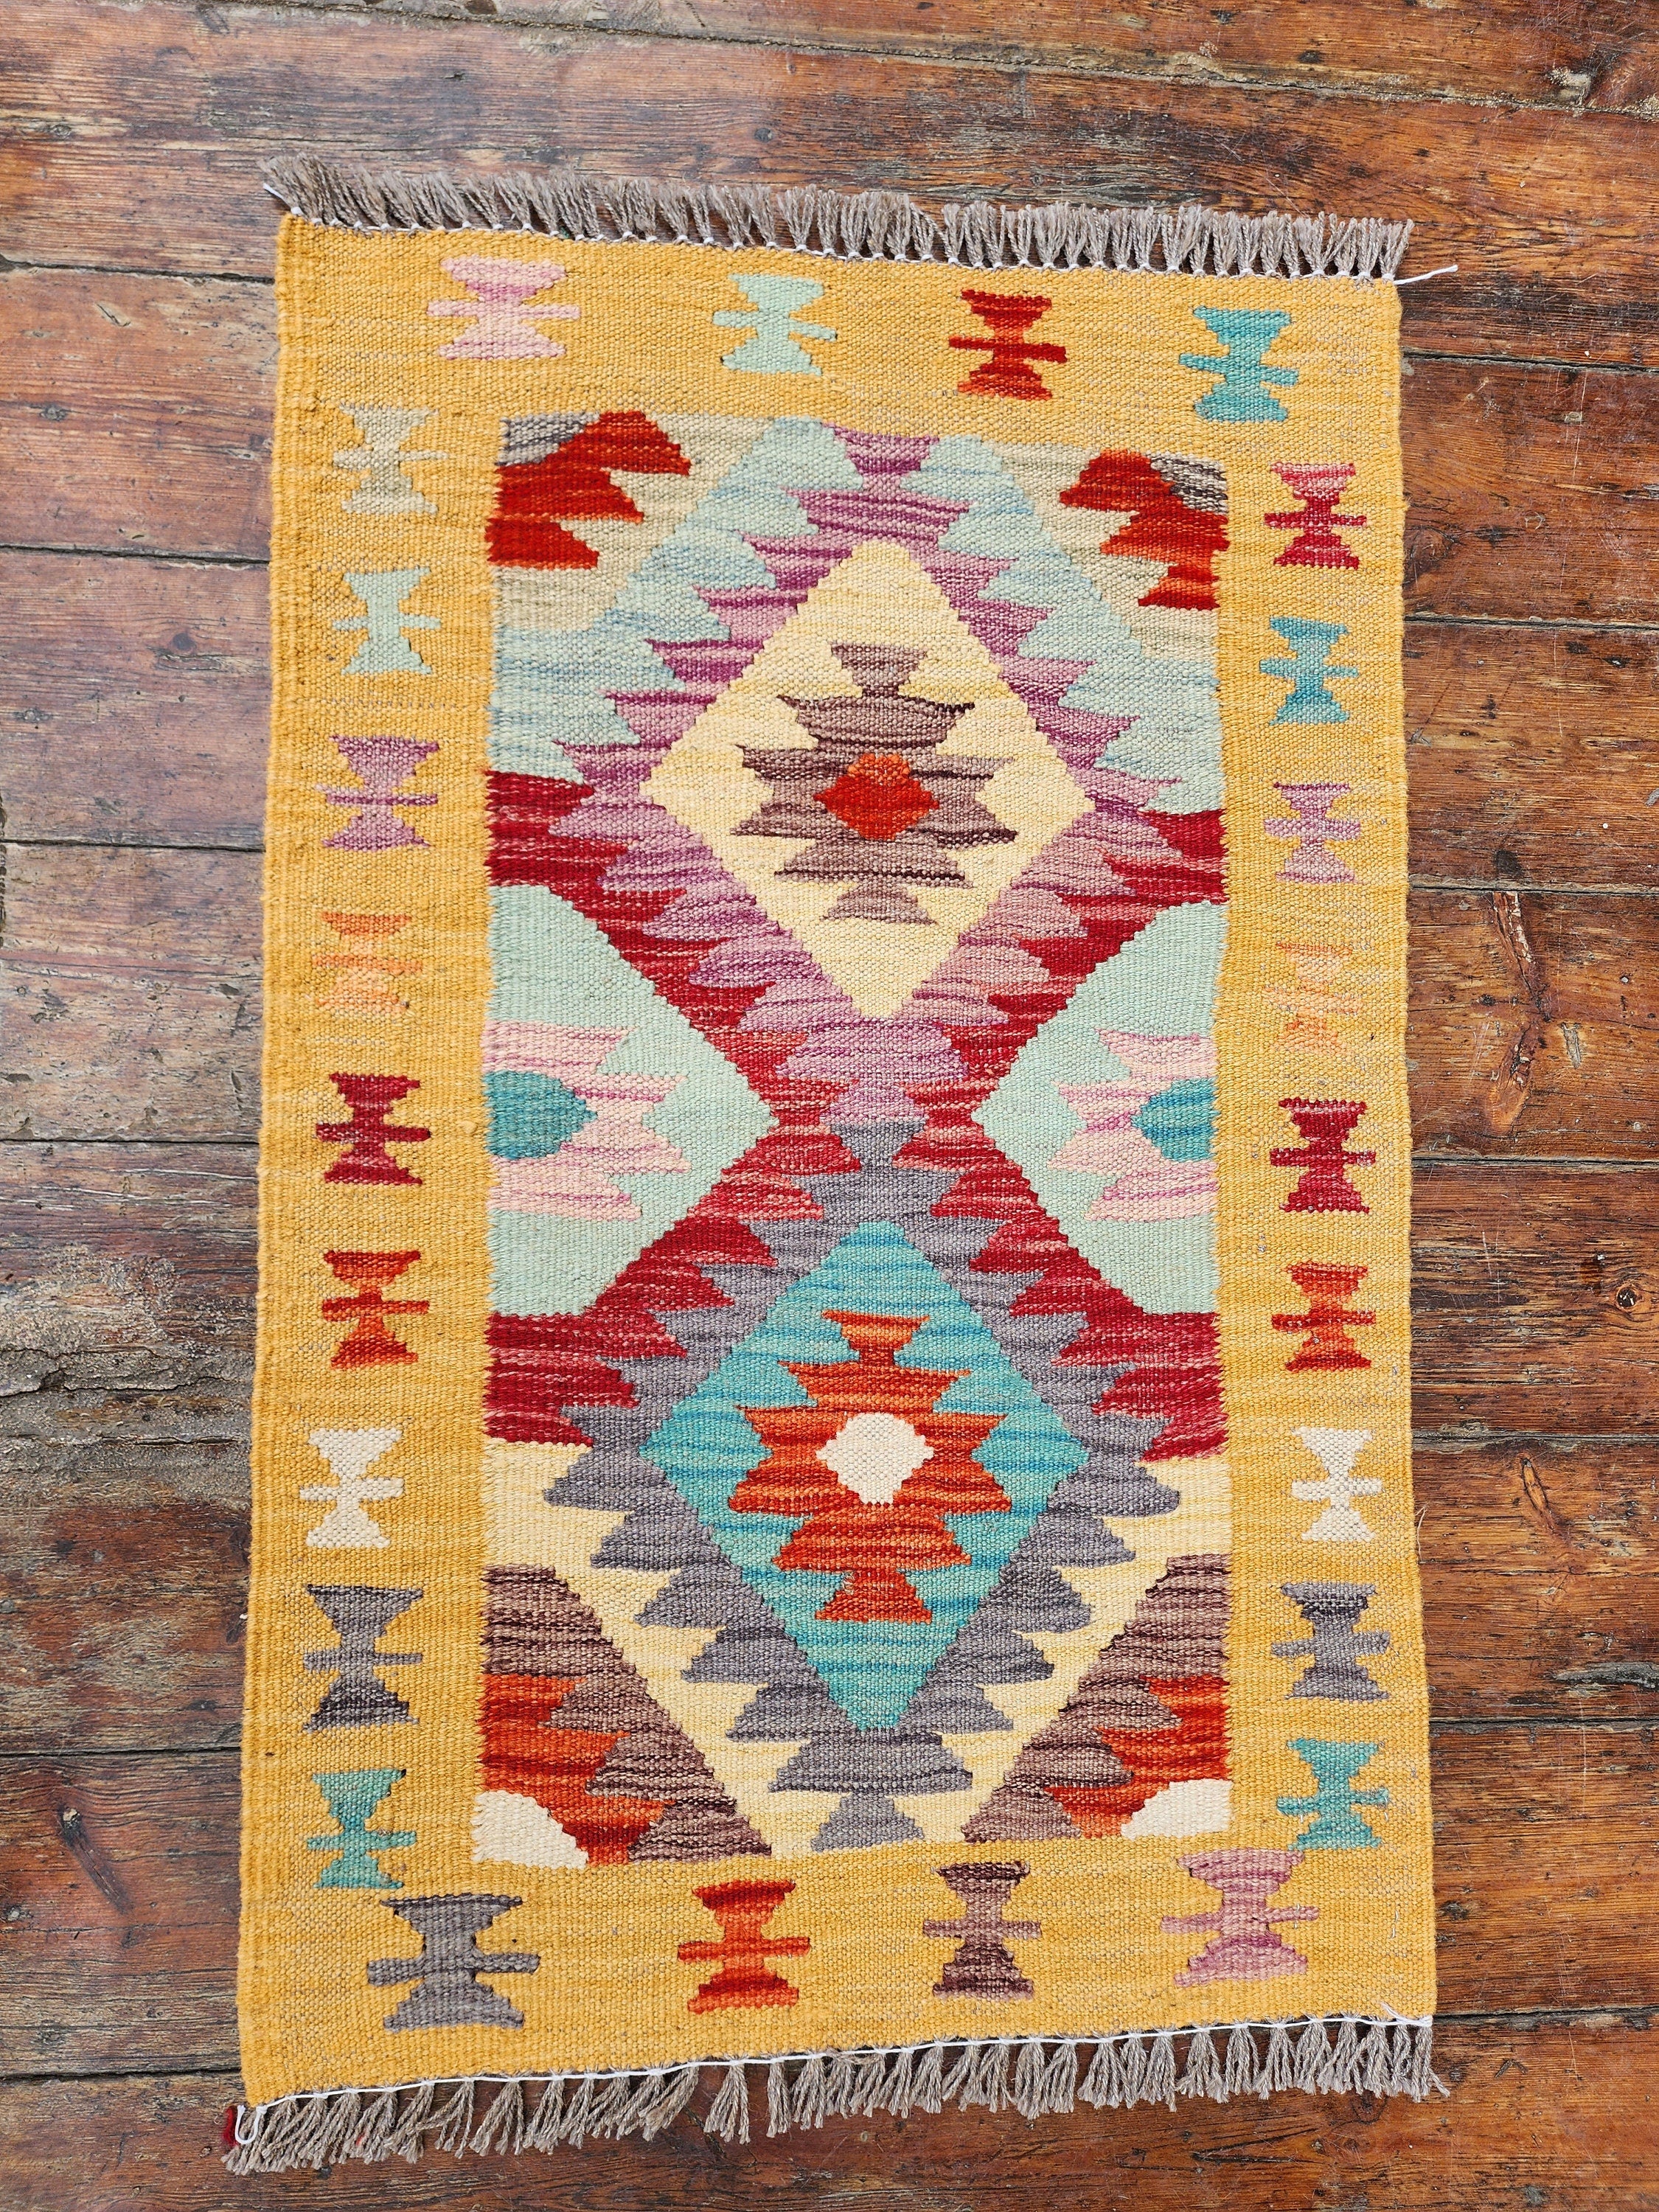 Small Afghan Kilim Rug, 2 ft 8 in x 1 ft 9 in, Turkish Contemporary Door Mat Rug